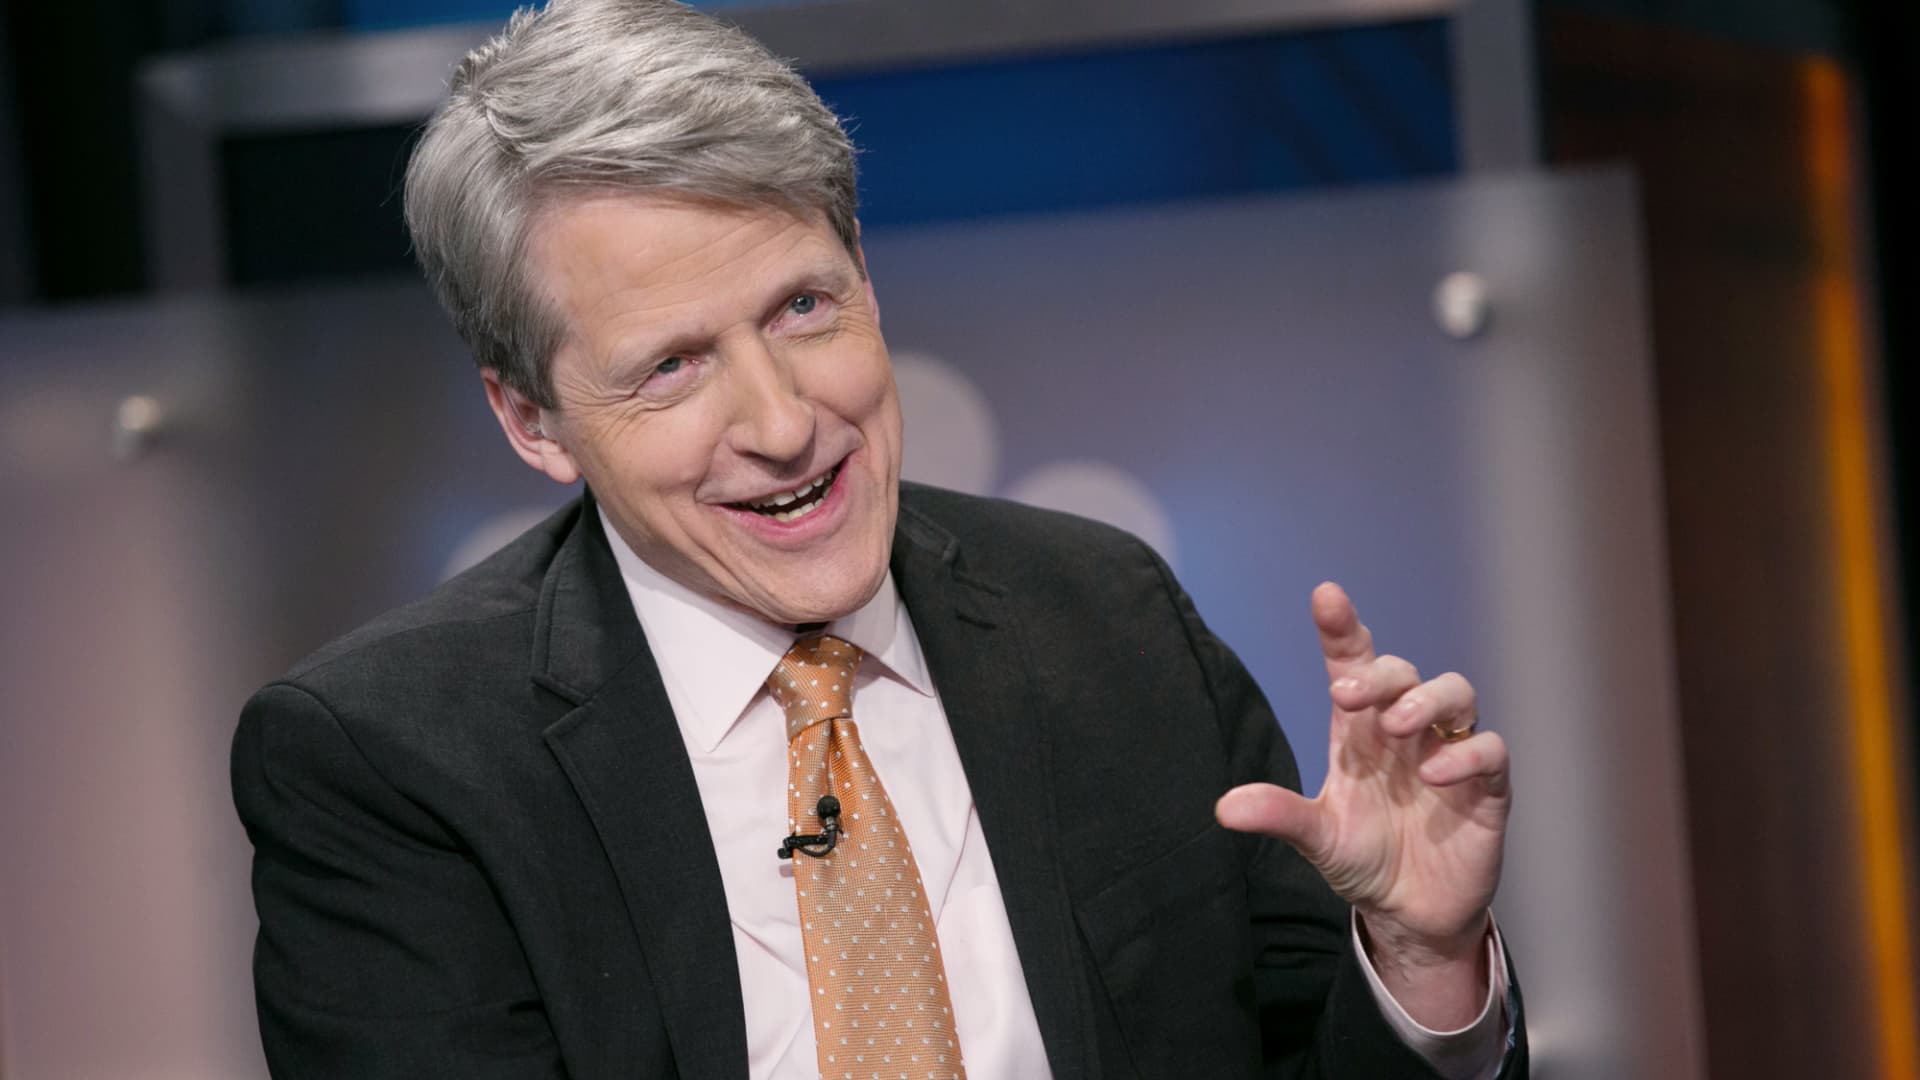 Robert Shiller says the Fed's rate cut had the opposite intended effect, sparked recession alarm